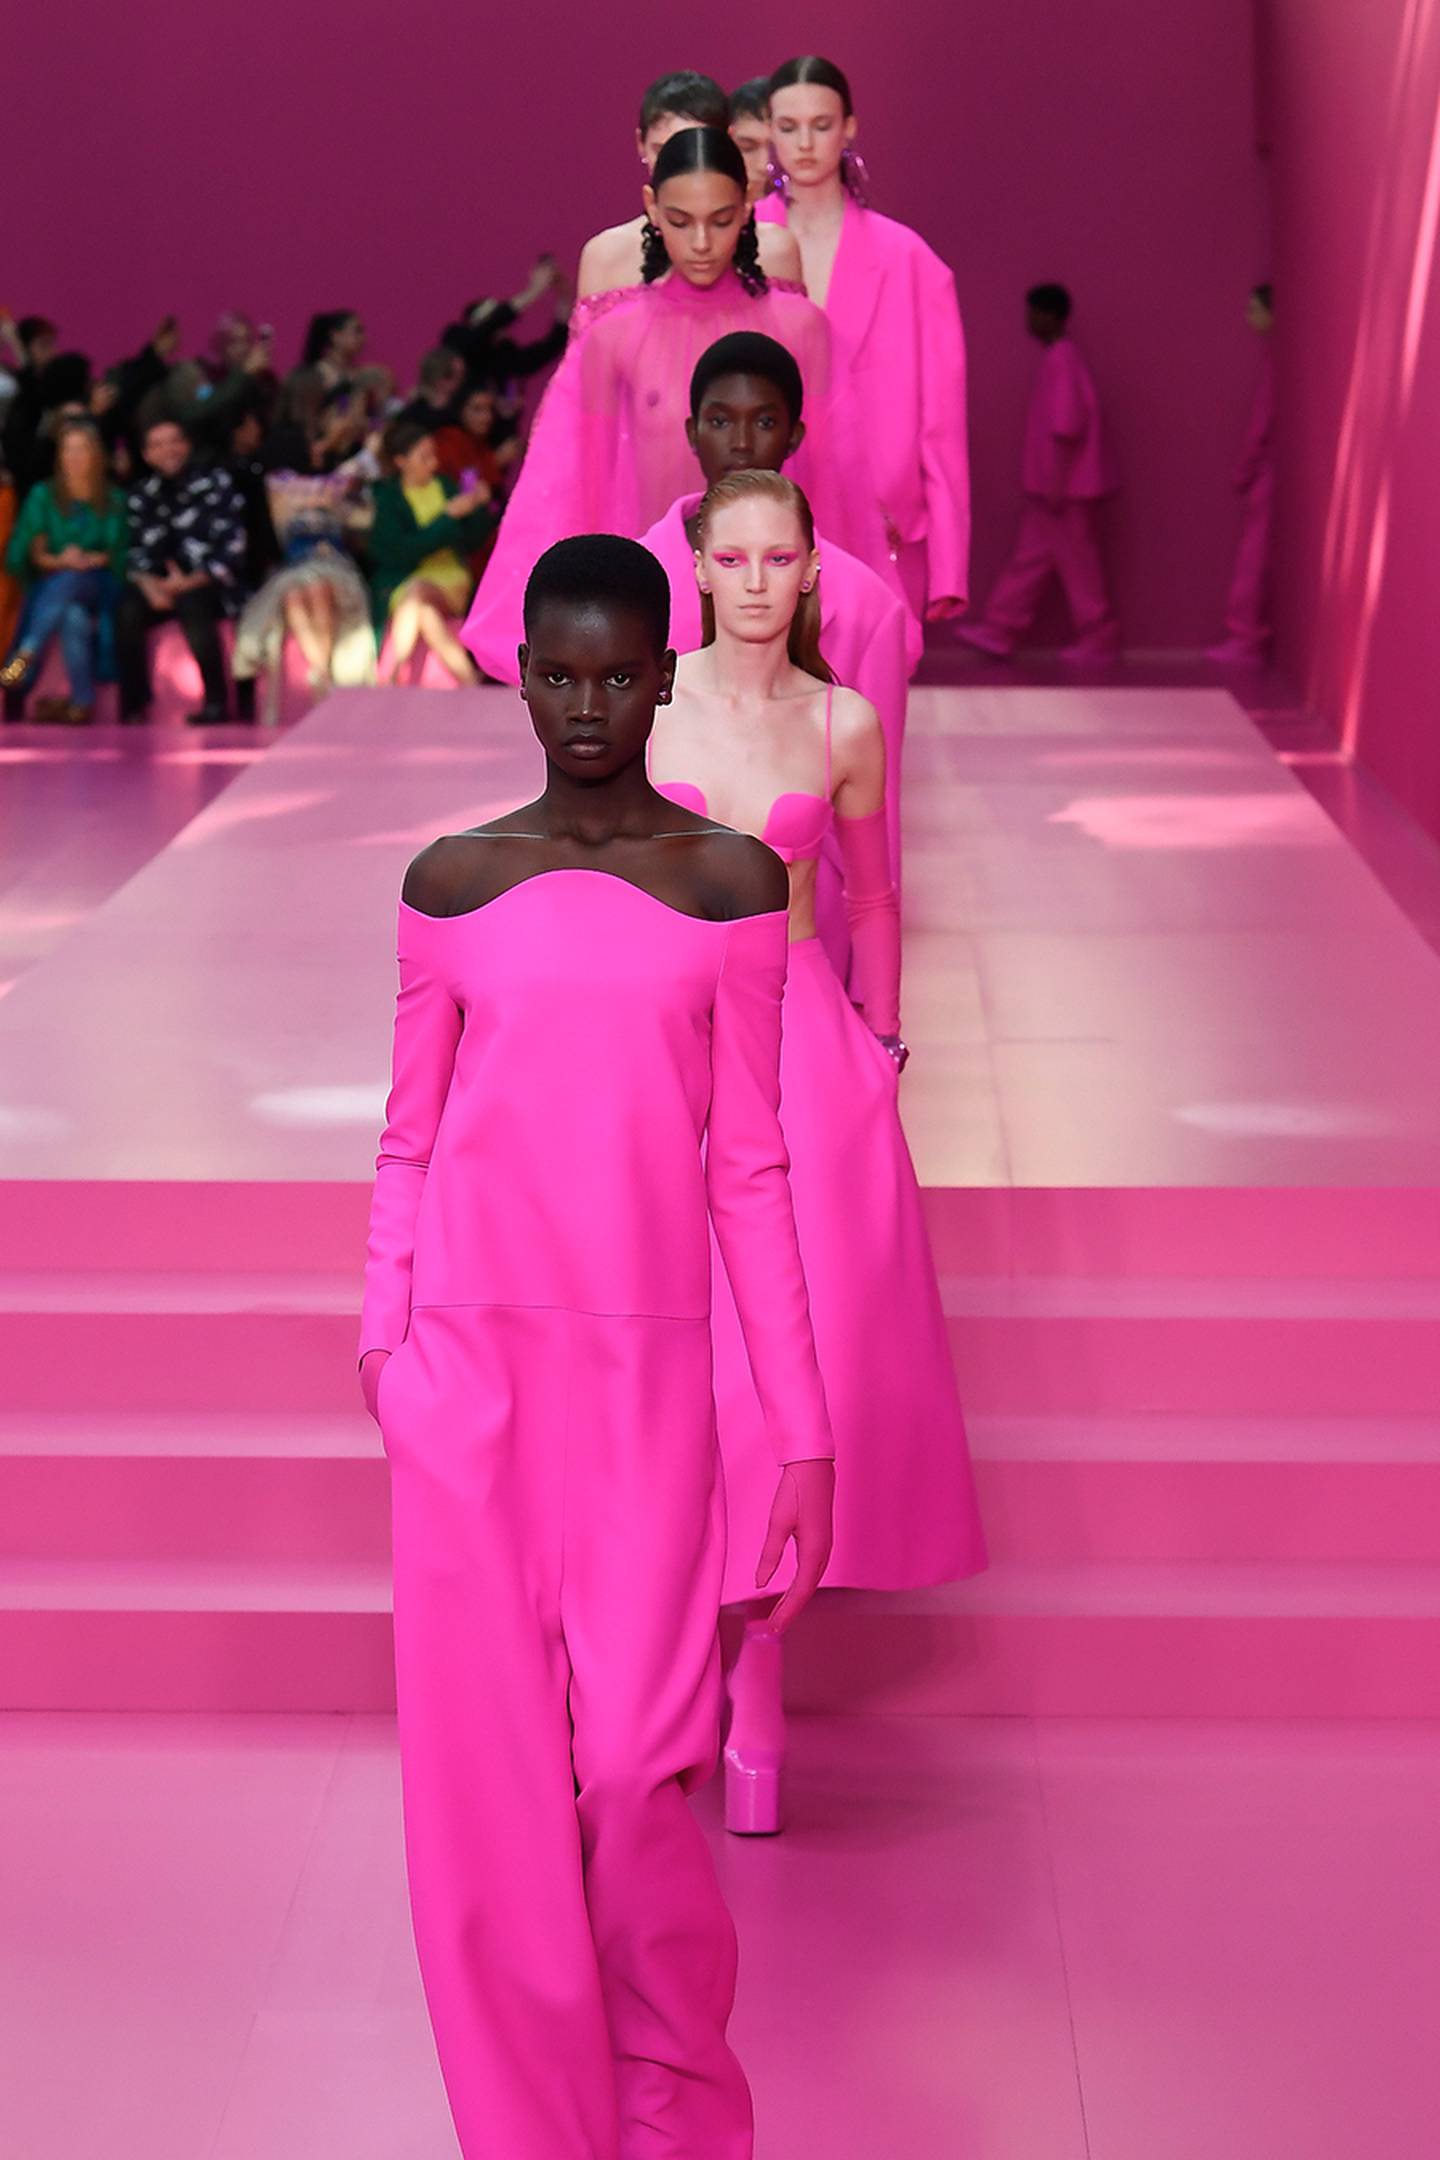 Is Hot Pink Here to Stay?